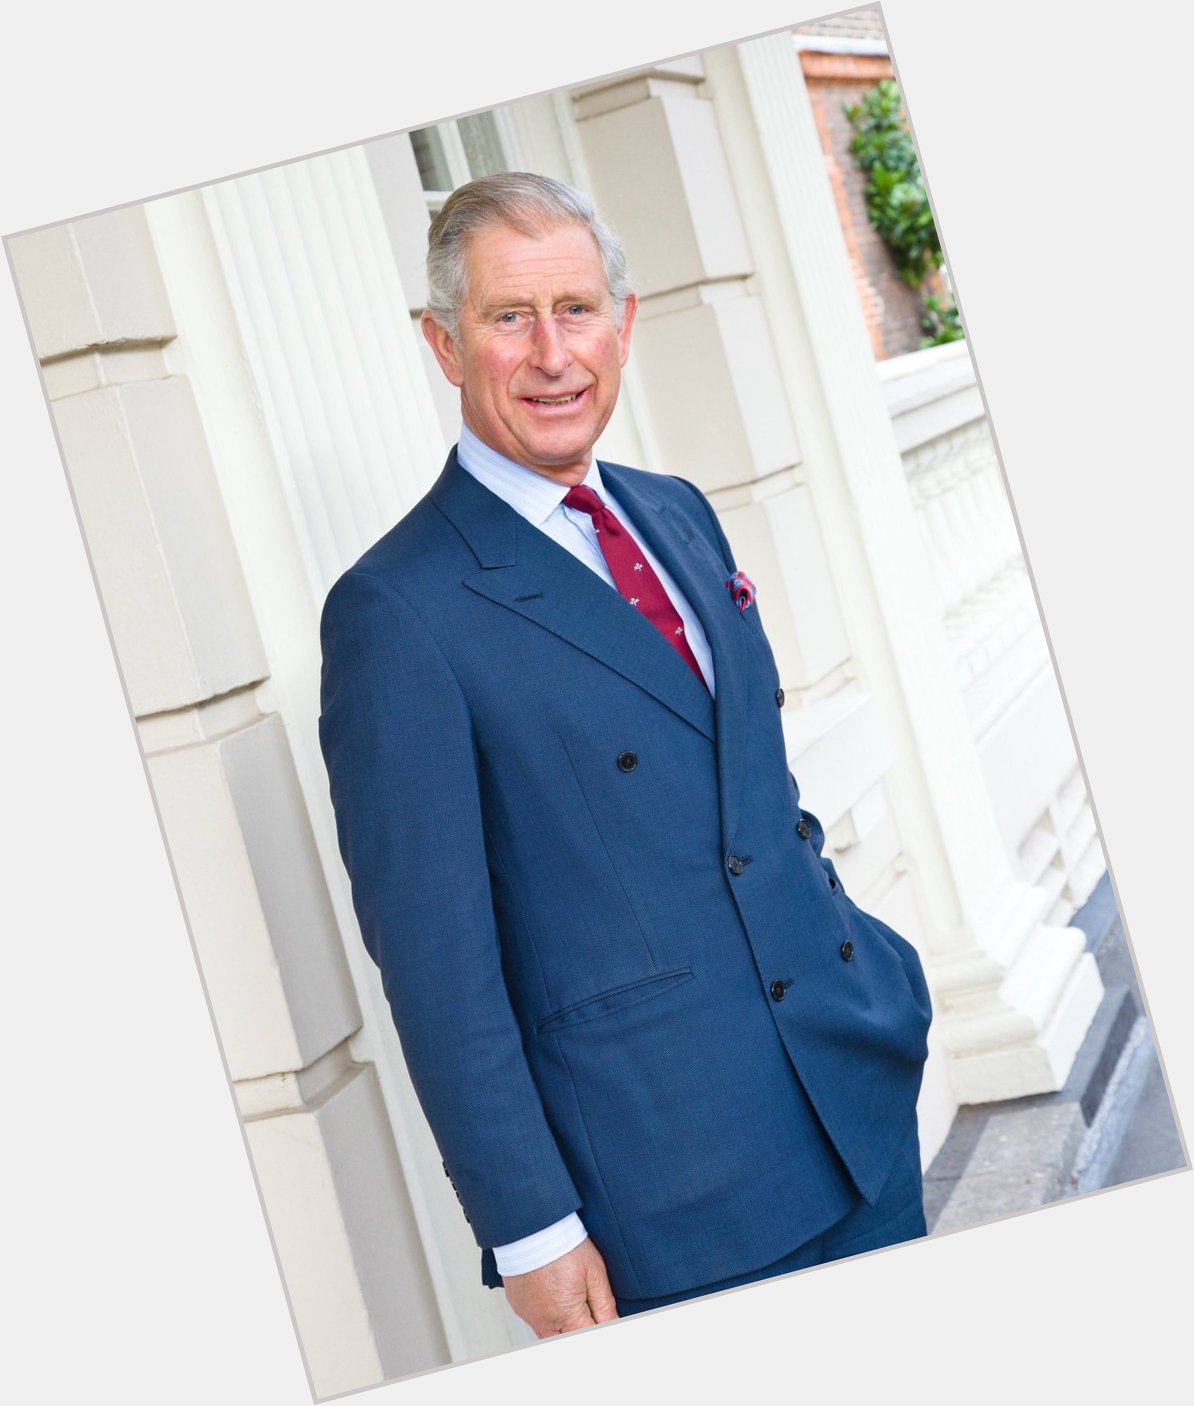 Happy 69th birthday to Prince Charles!  